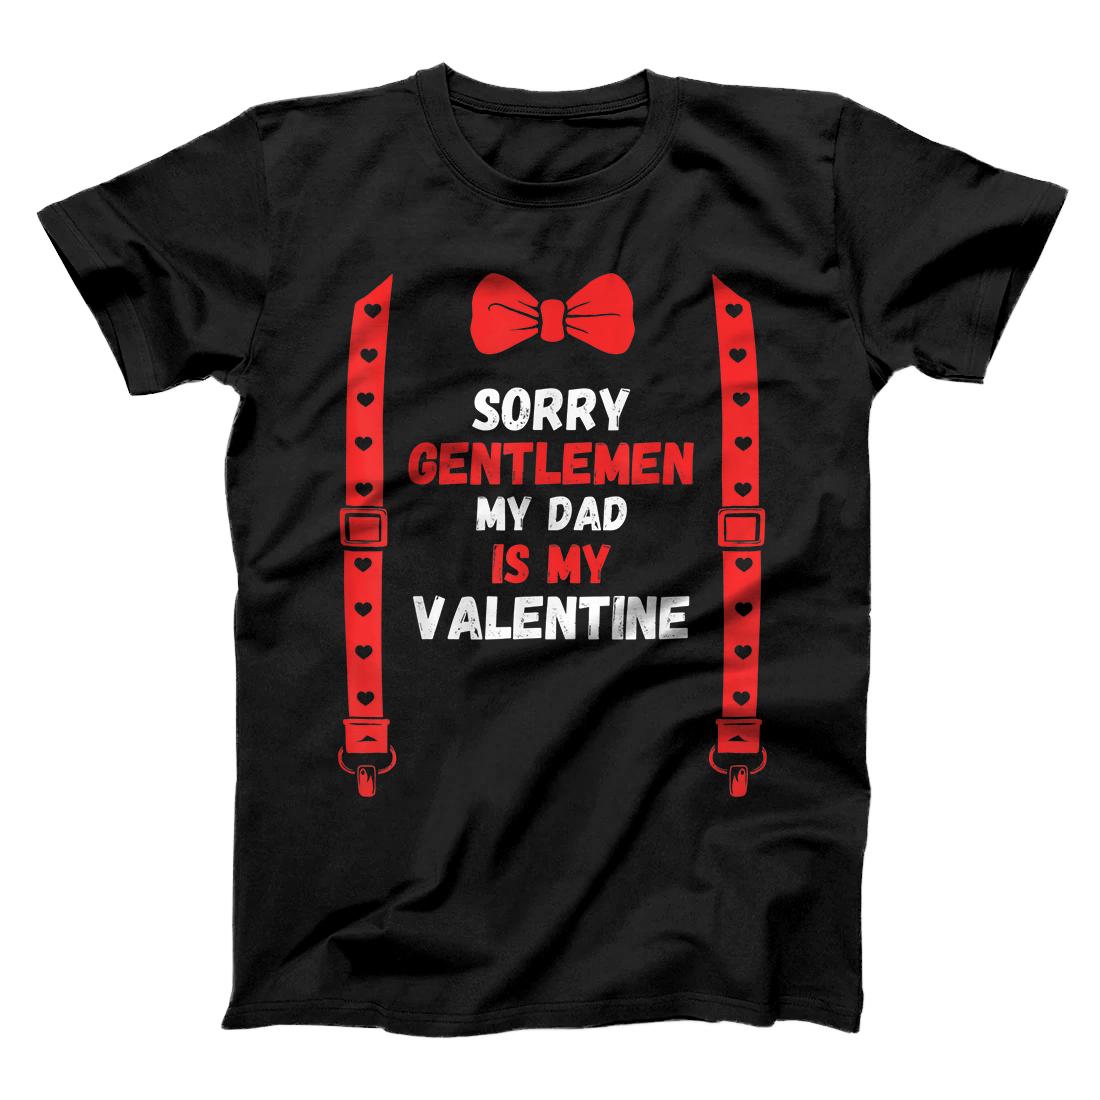 Personalized Valentines Day Custome Sorry Gentlemen my dad is my valentin T-Shirt